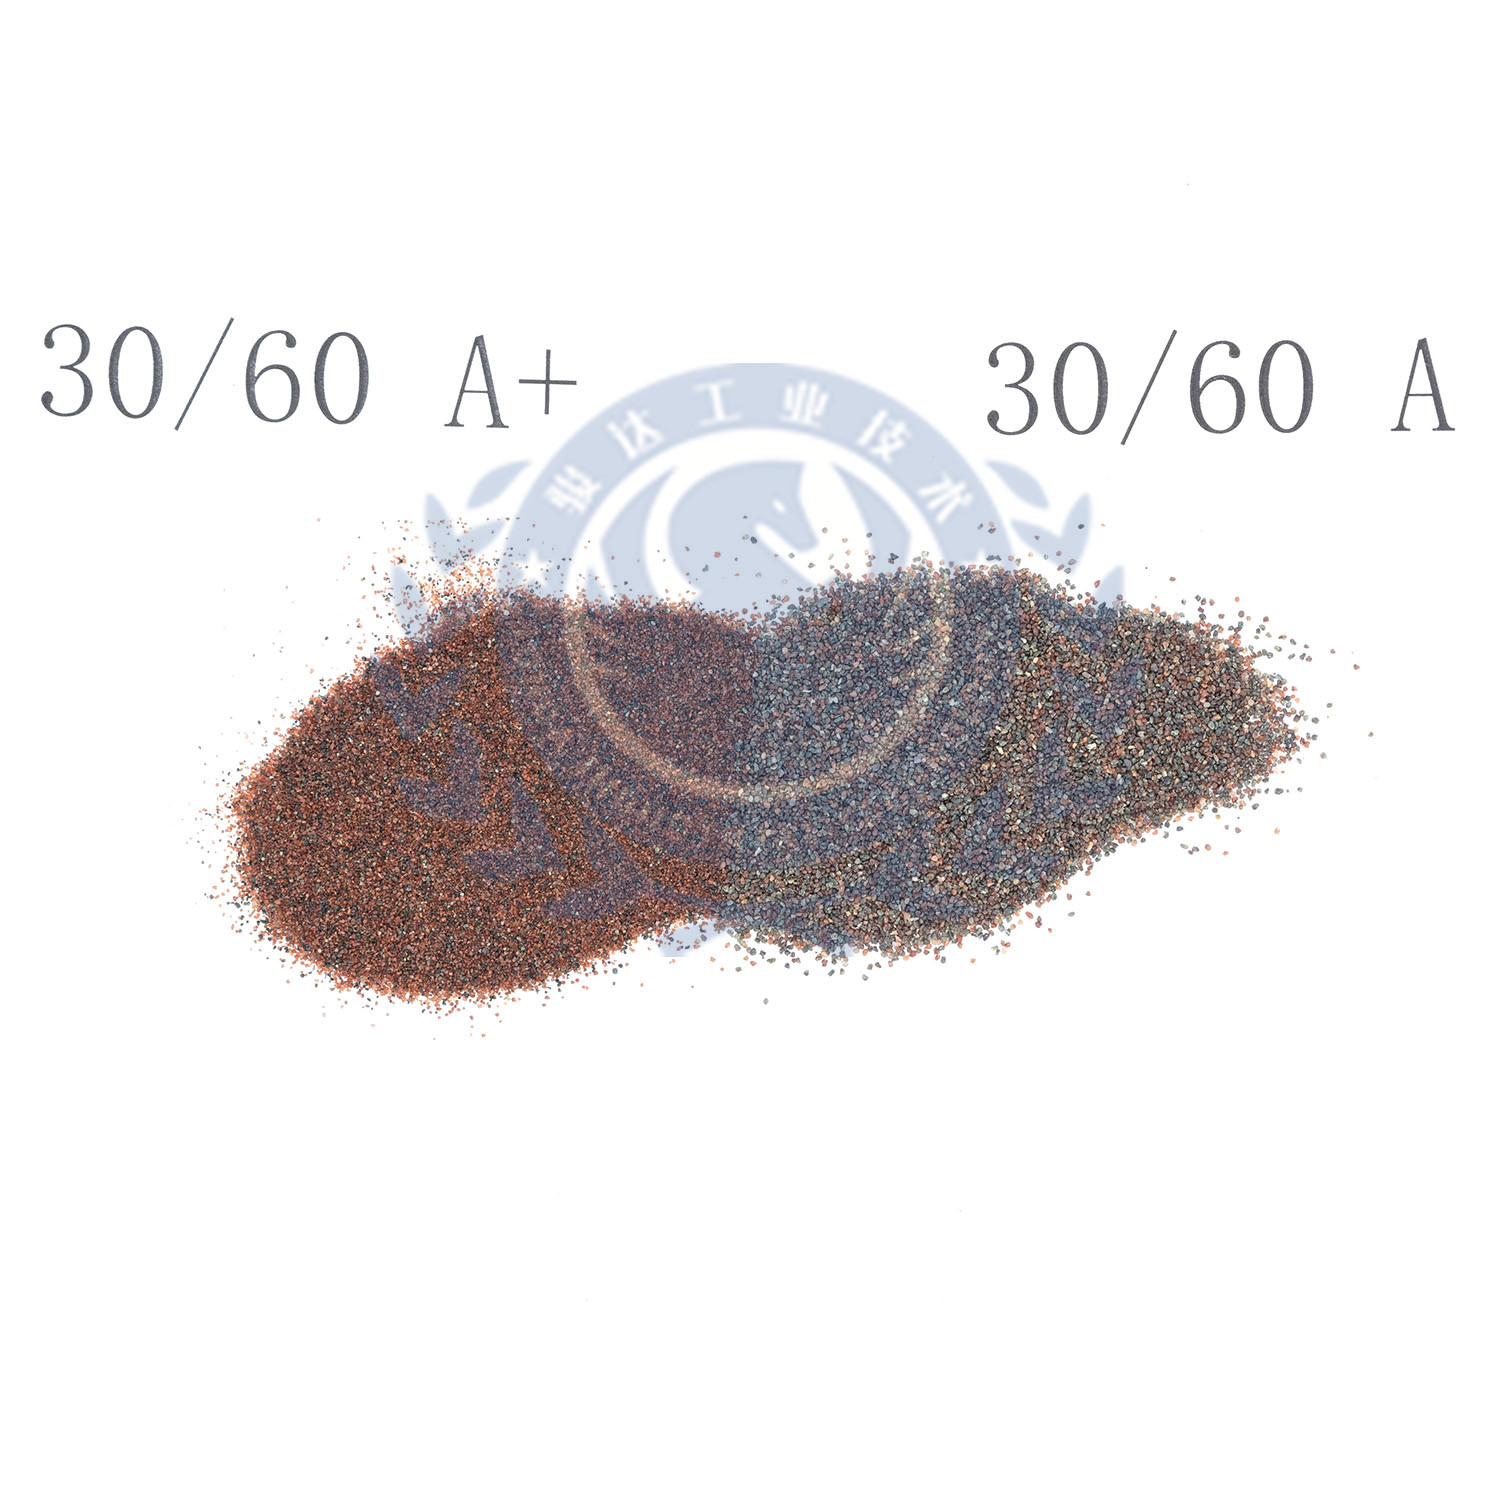 CLEANING BY ABRASIVE Garnet sand